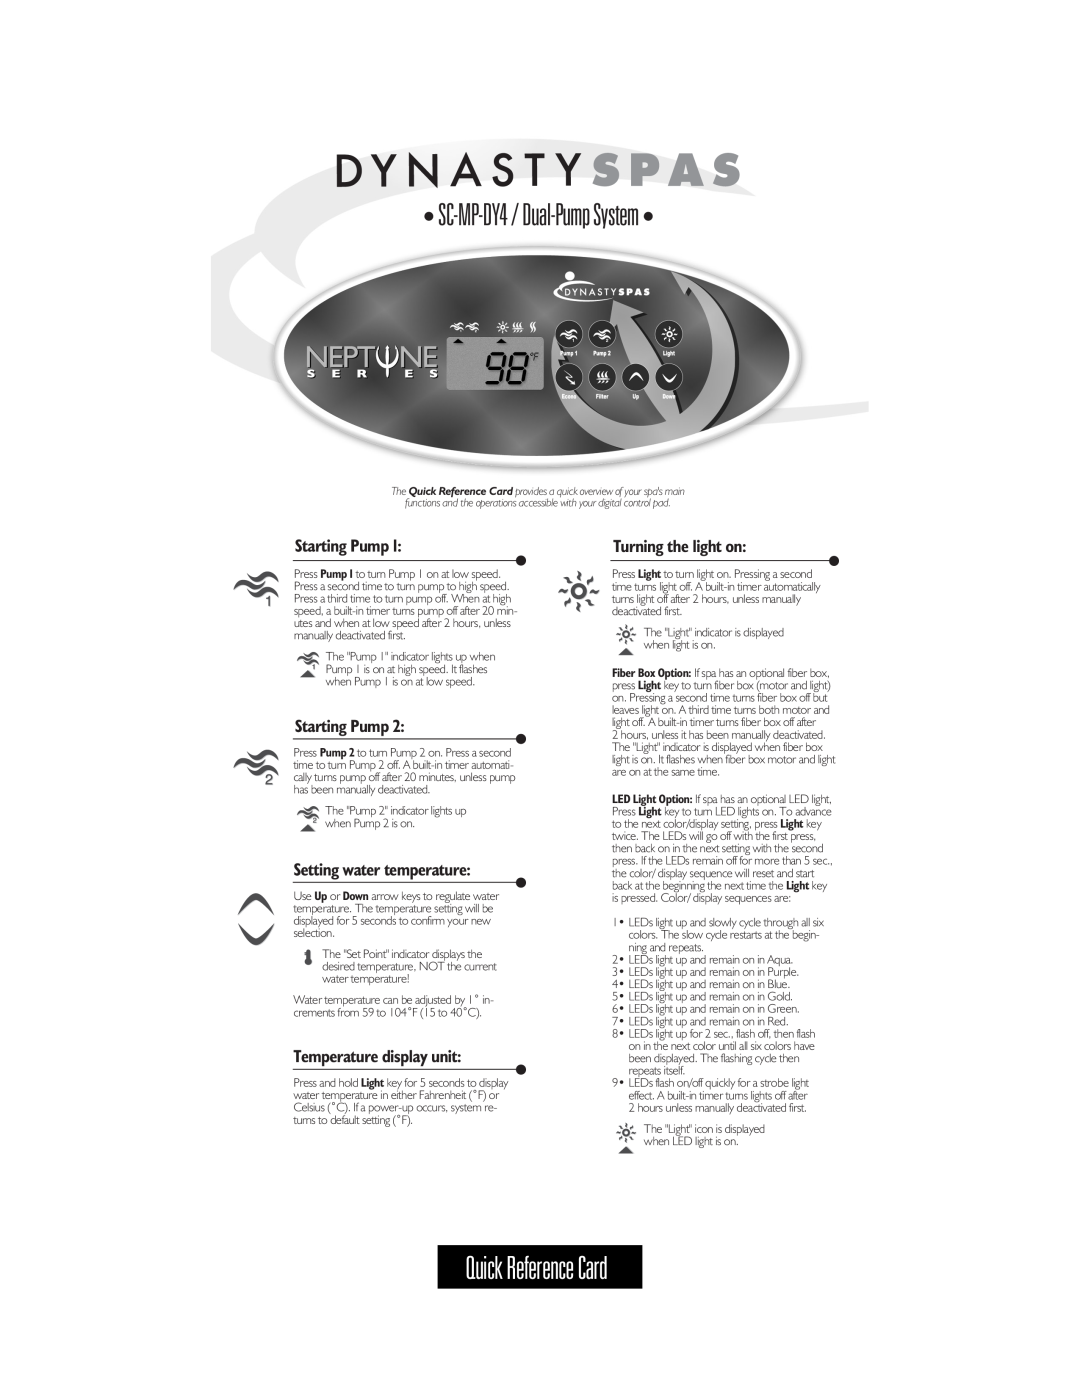 Dynasty Spas 9919-100578-B manual SC-MP-DY4 / Dual-Pump System, Quick Reference Card, Starting Pump, Turning the light on 